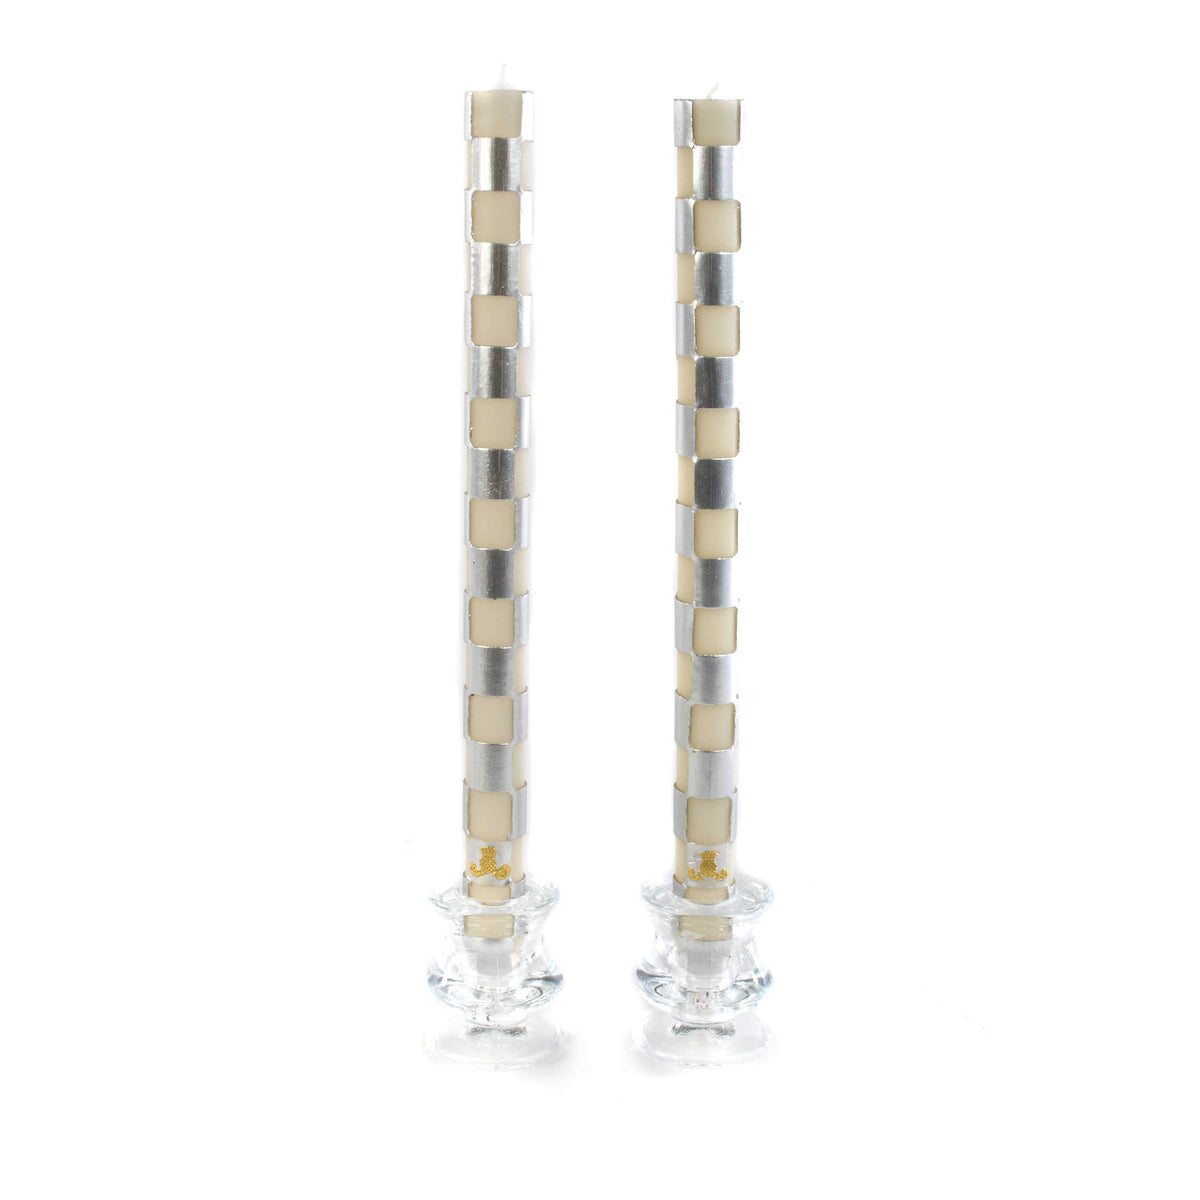 Silver Check Candles - Set of 2 - My Christmas